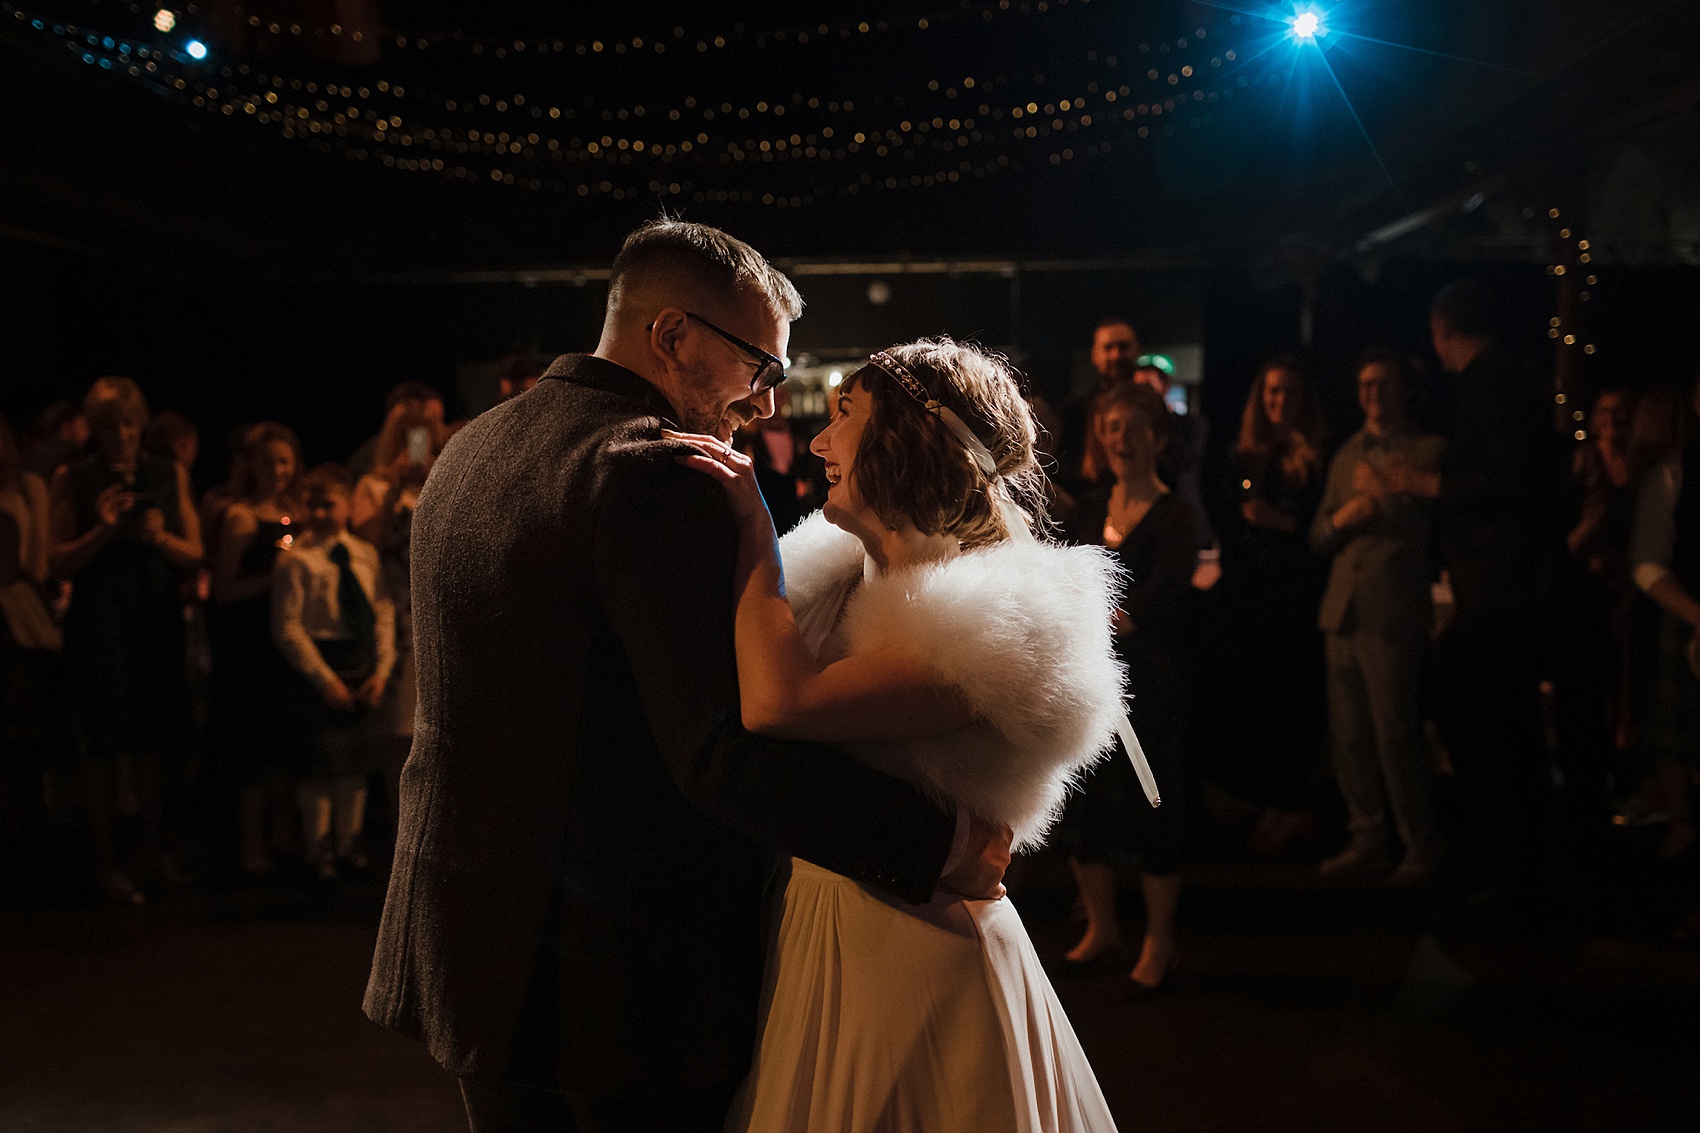 s bride Glasgow city wedding  - A 1920s Inspired Bride and her Fun and Informal Glasgow City Centre Wedding